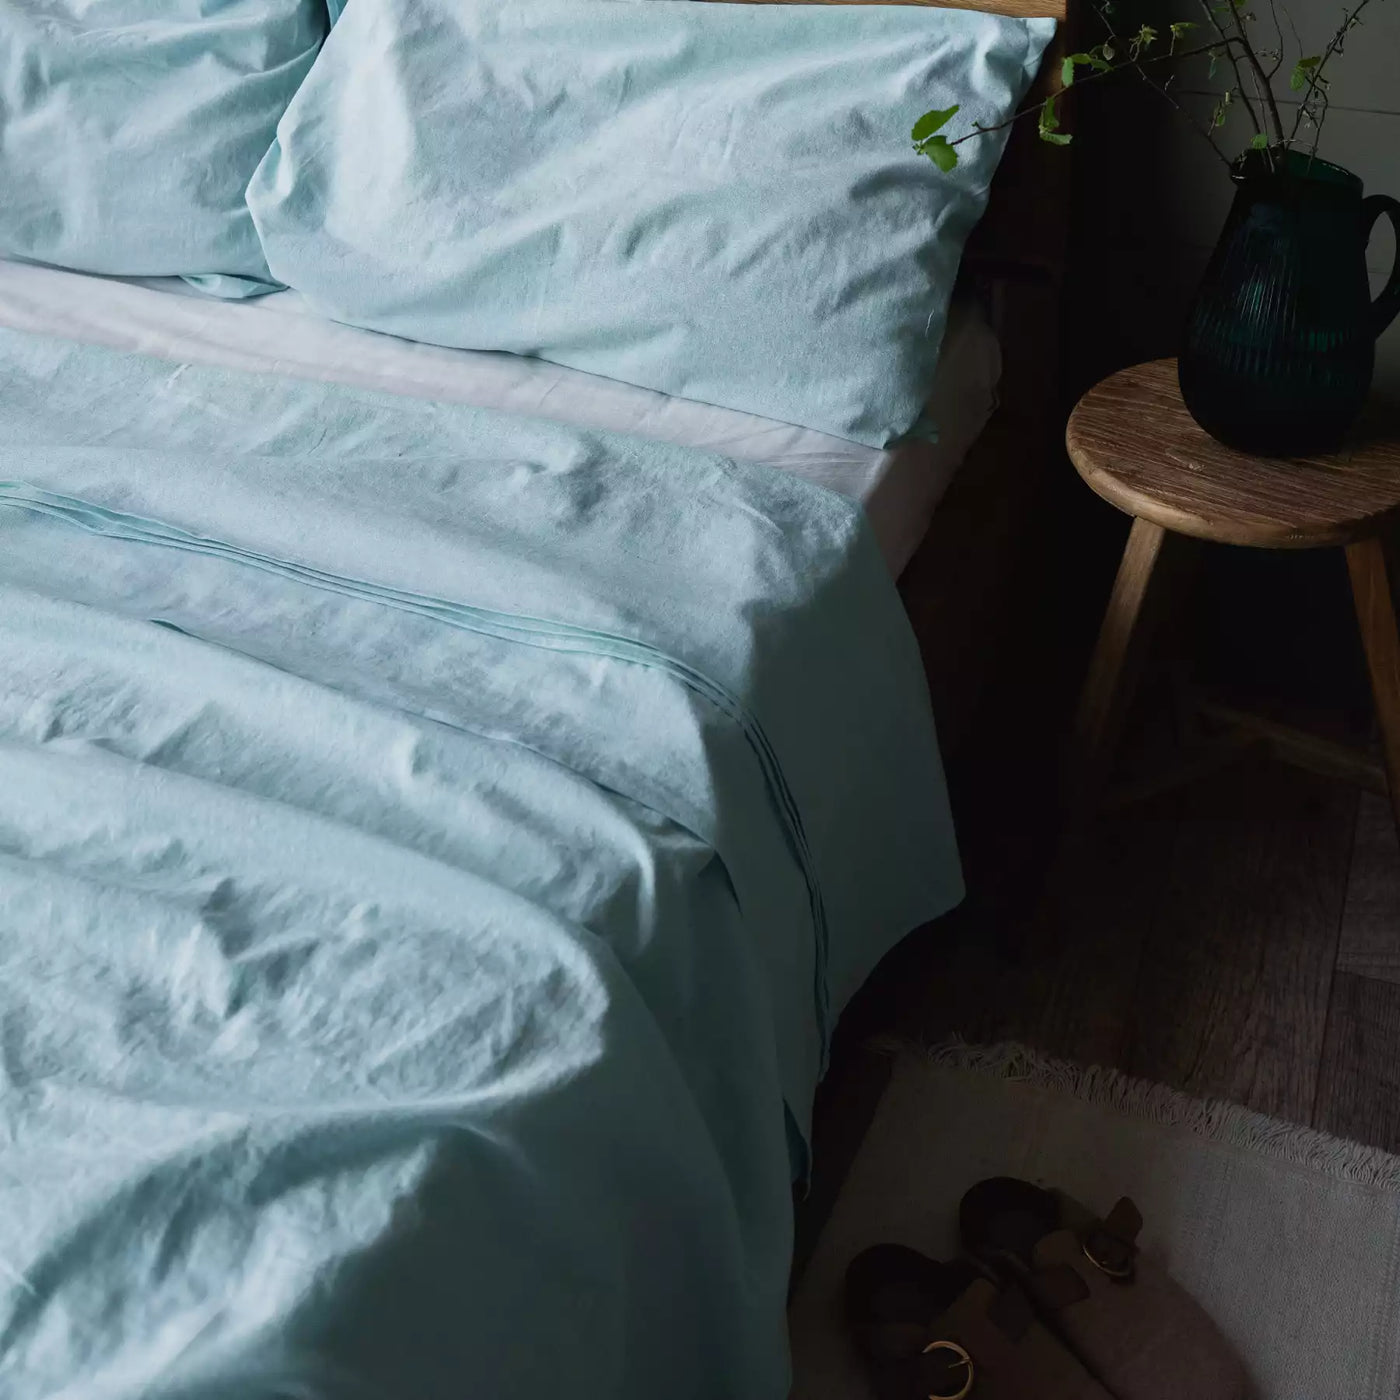 Linen & Cotton Bedding set with Duvet cover 200x200 in Turquoise Melange